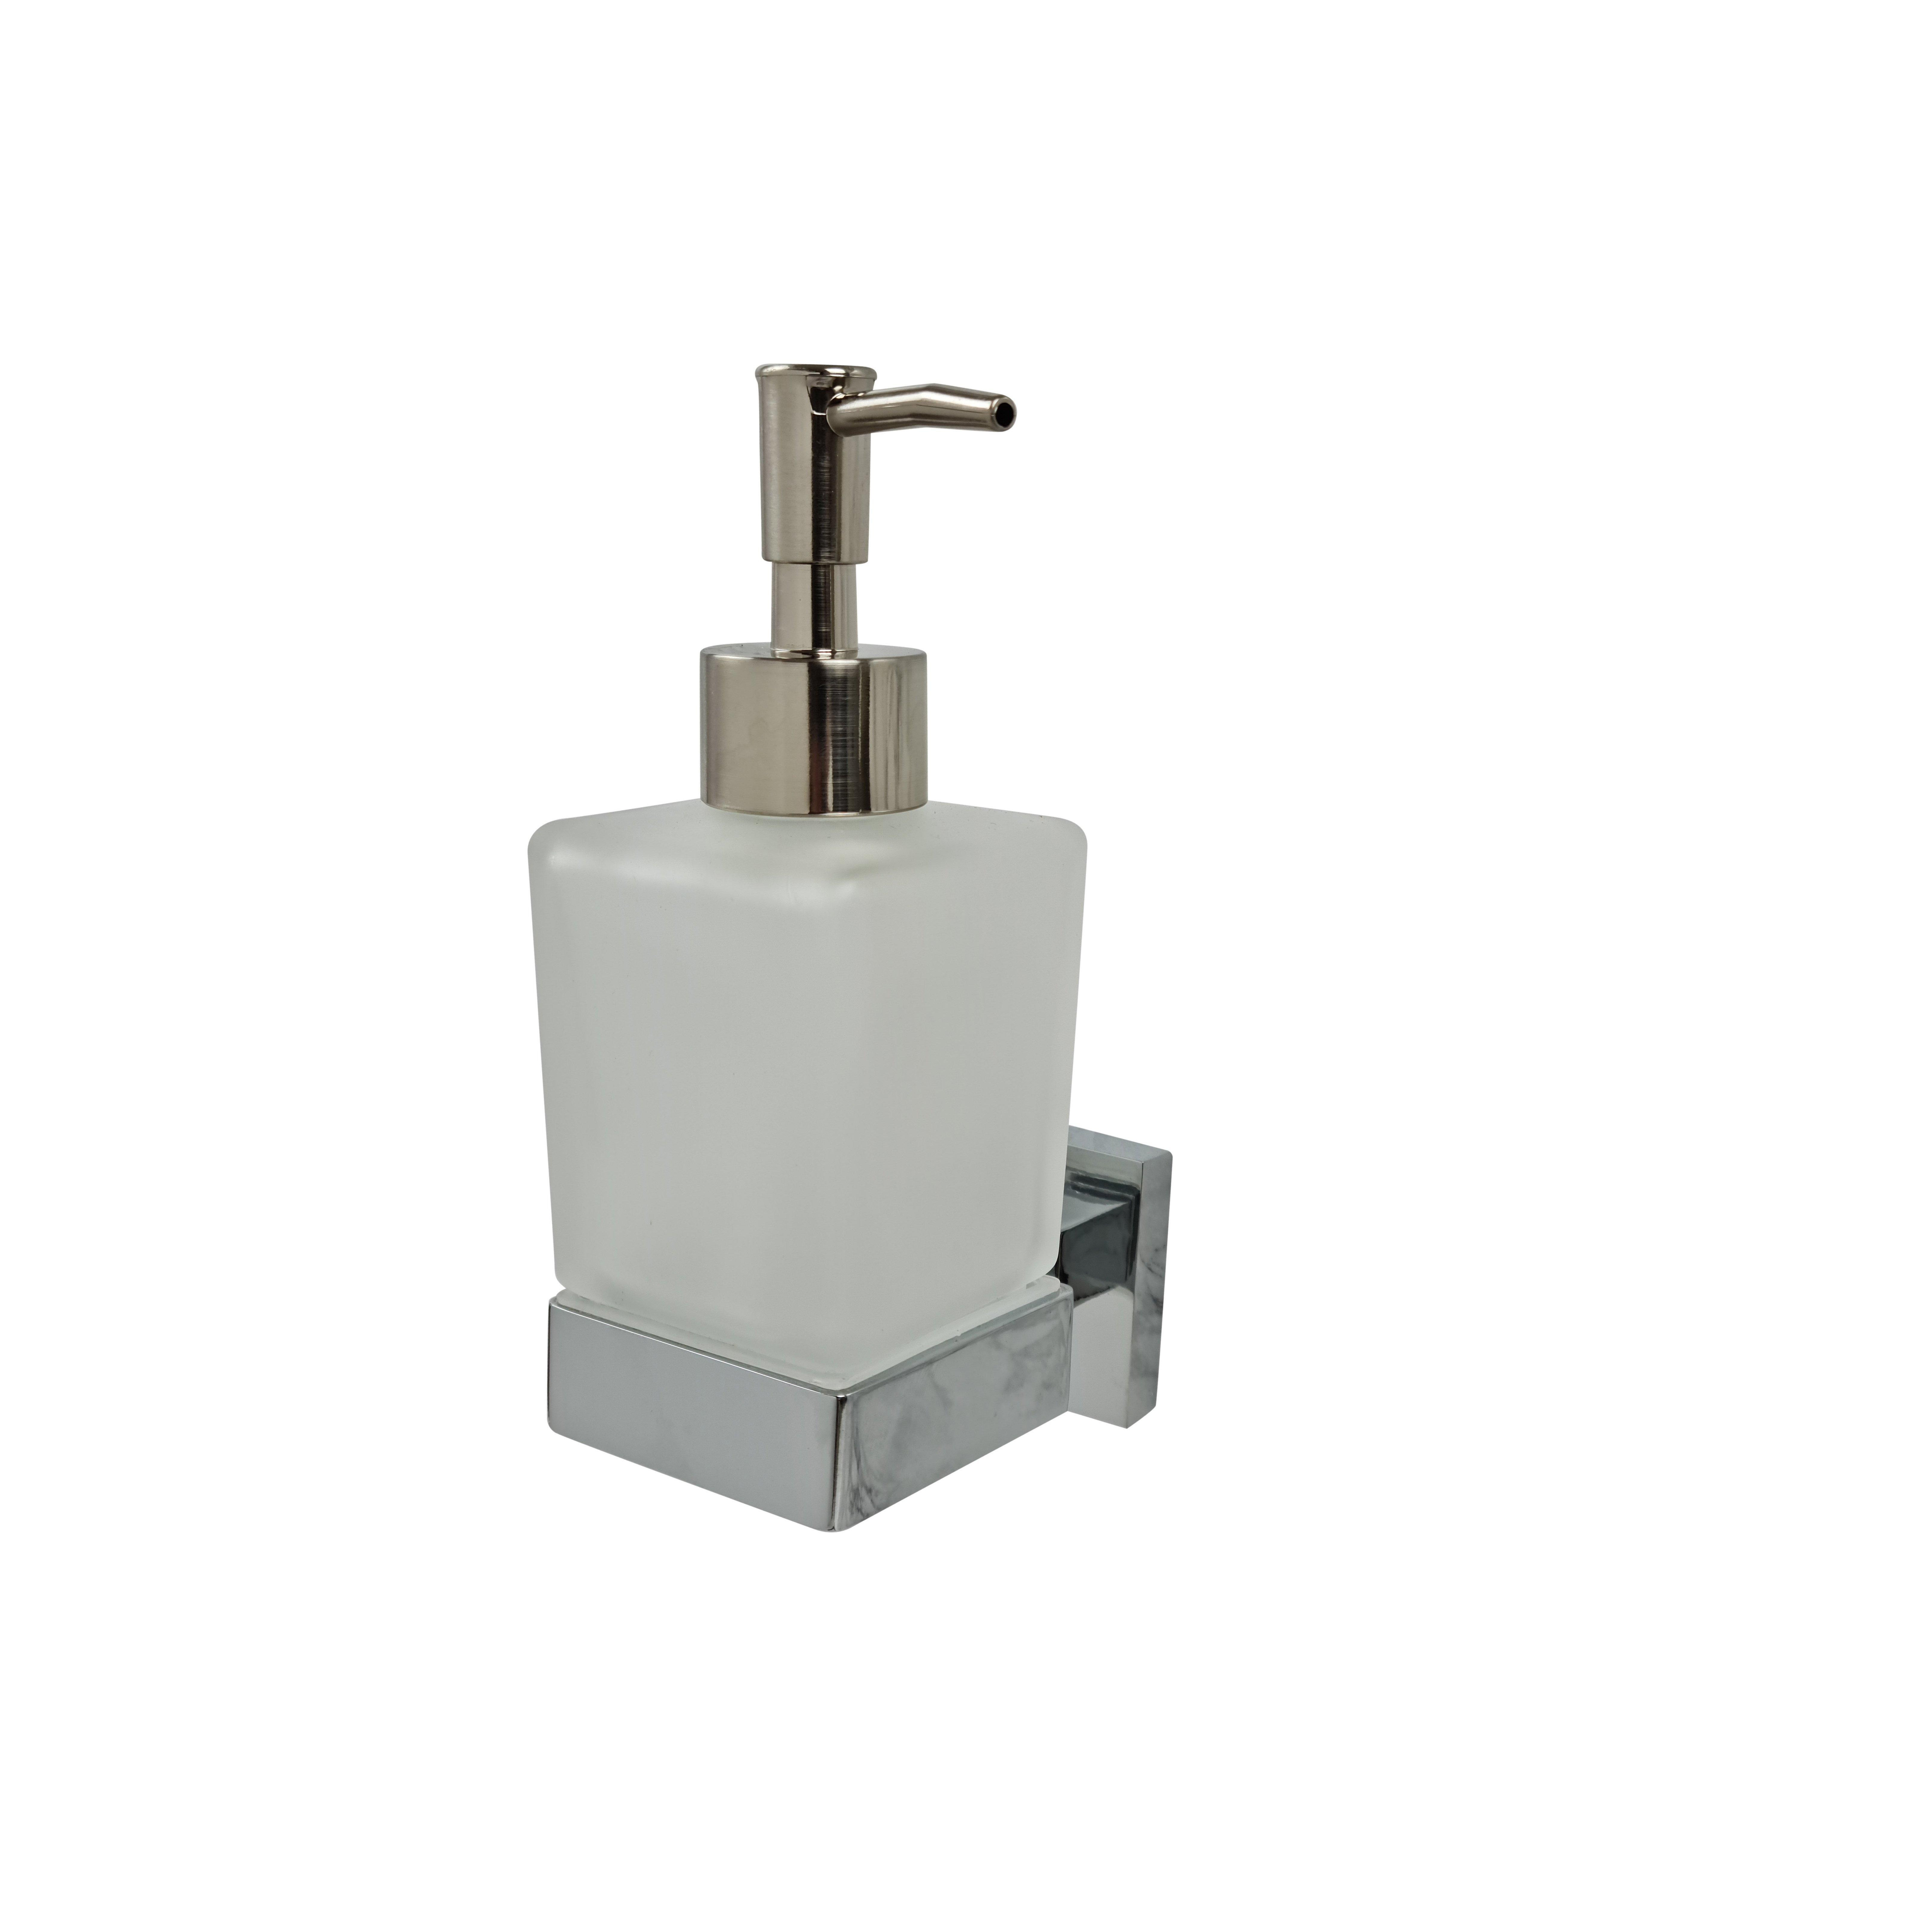 Soap Holder Wall Mounted Square Finish Glass Soap Chrome Accessory - image 1